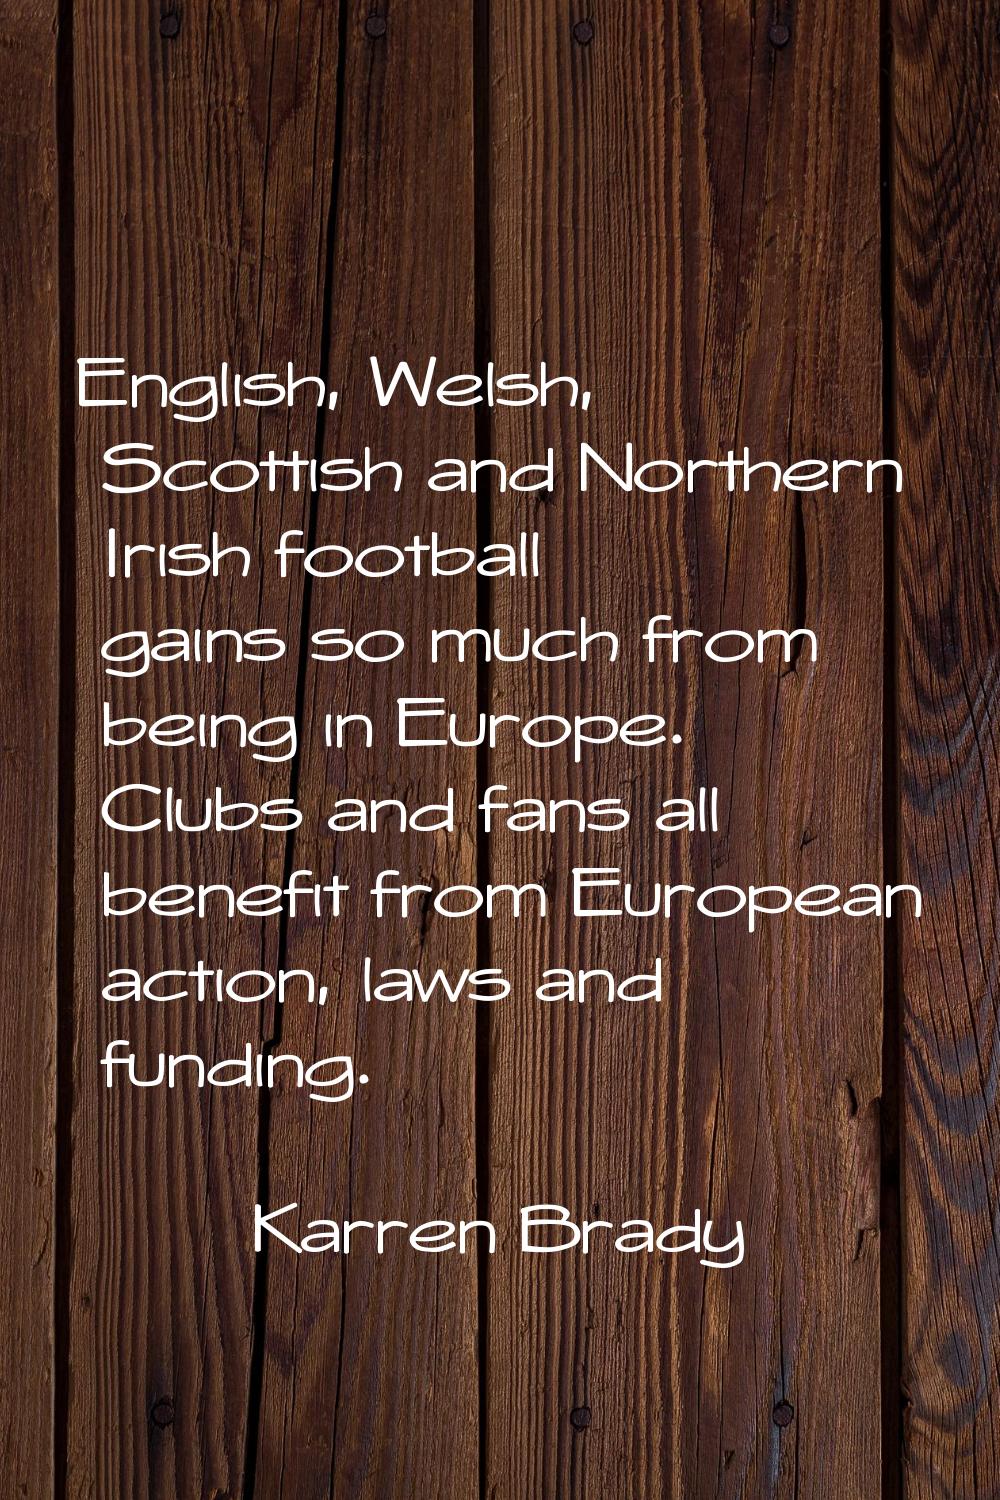 English, Welsh, Scottish and Northern Irish football gains so much from being in Europe. Clubs and 